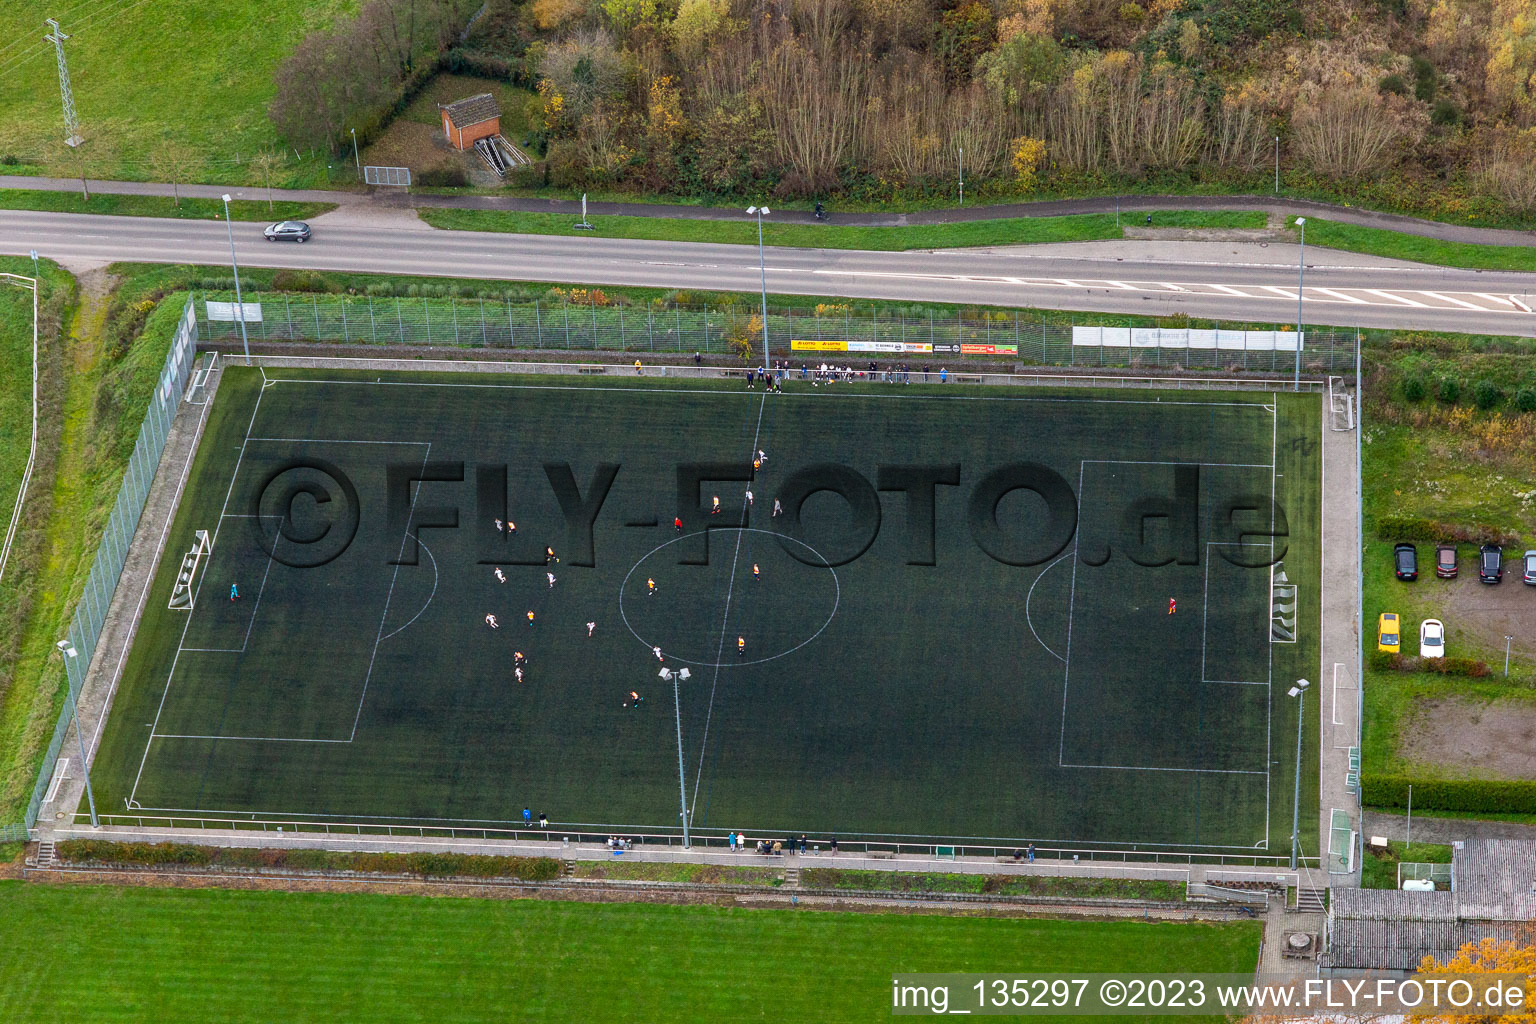 Artificial turf pitch in the district Minderslachen in Kandel in the state Rhineland-Palatinate, Germany